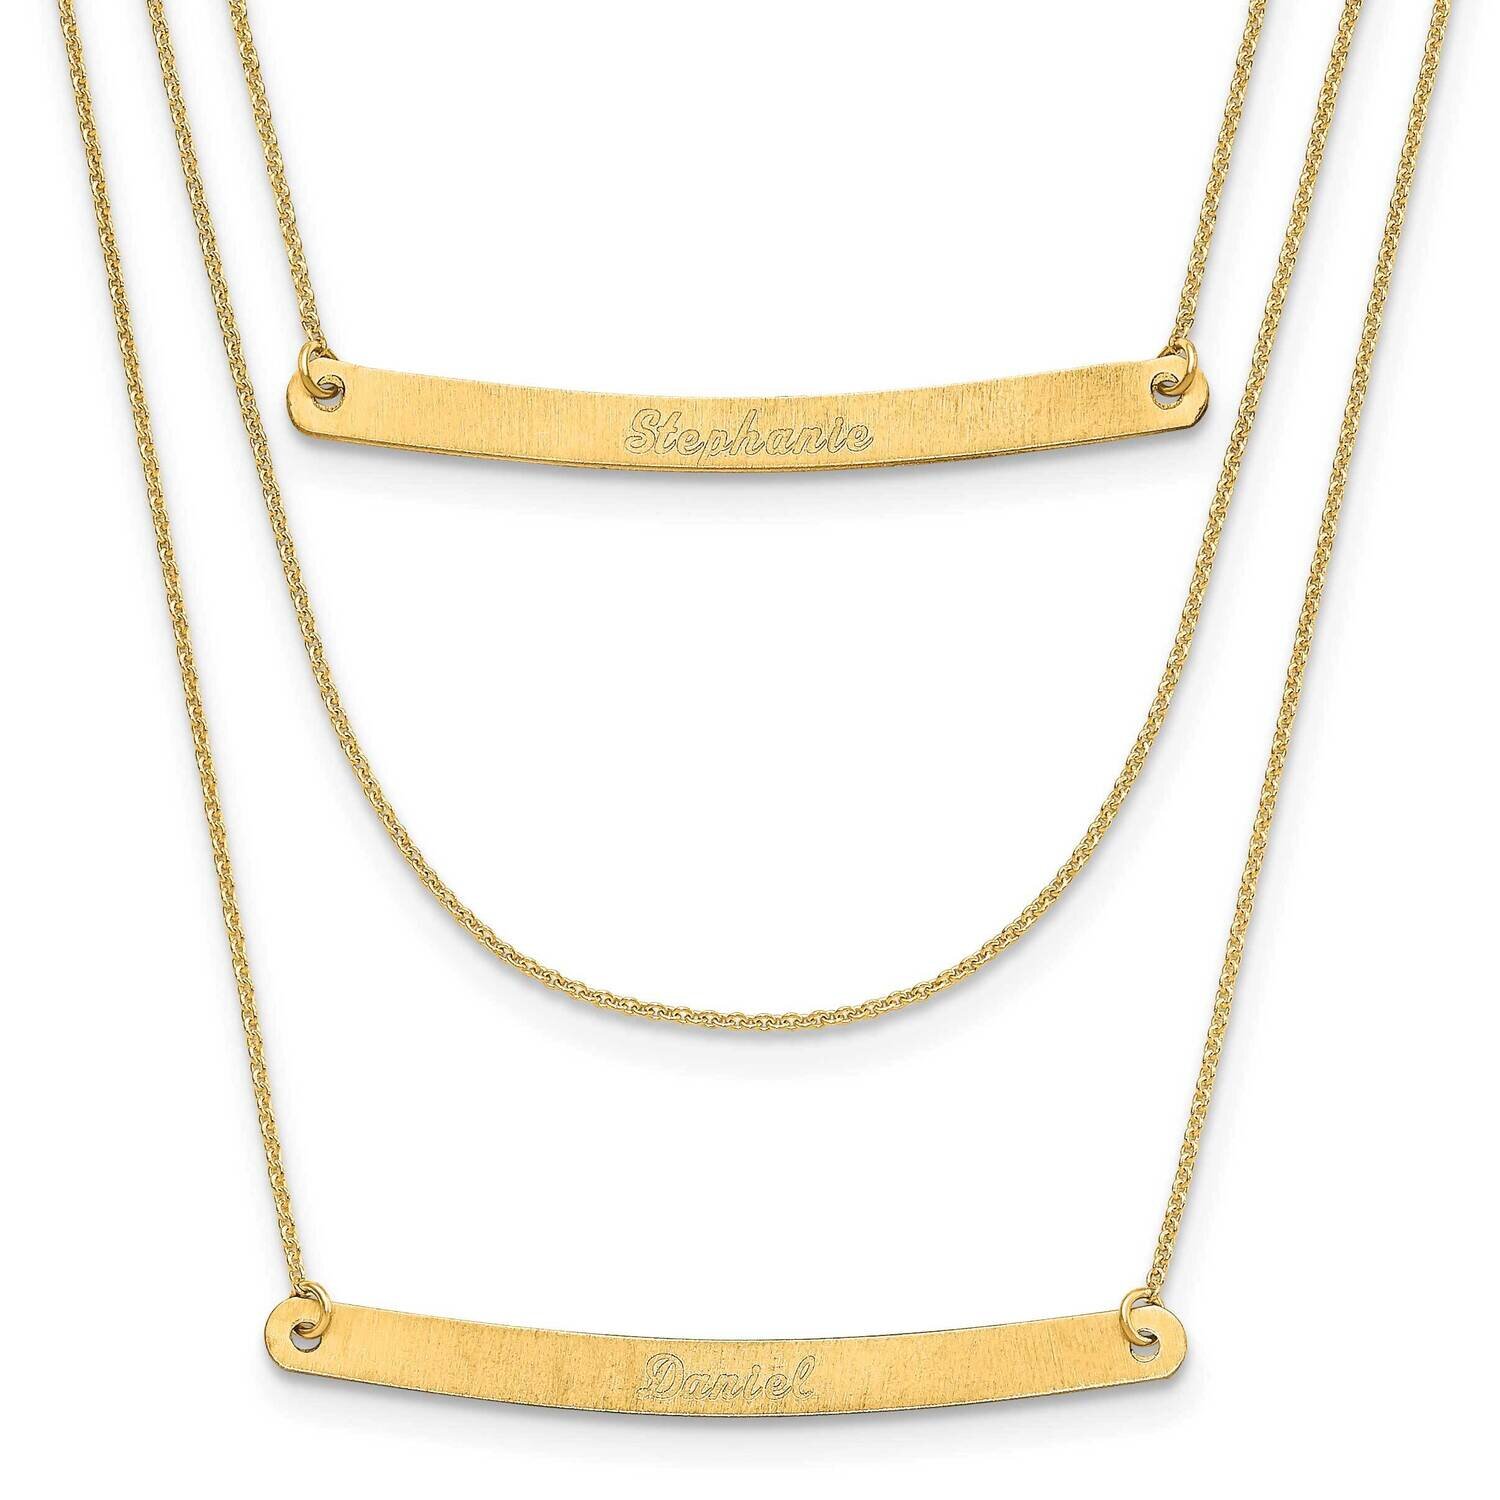 3 Chain with 2 Bars Necklace 14k Gold Brushed XNA652Y